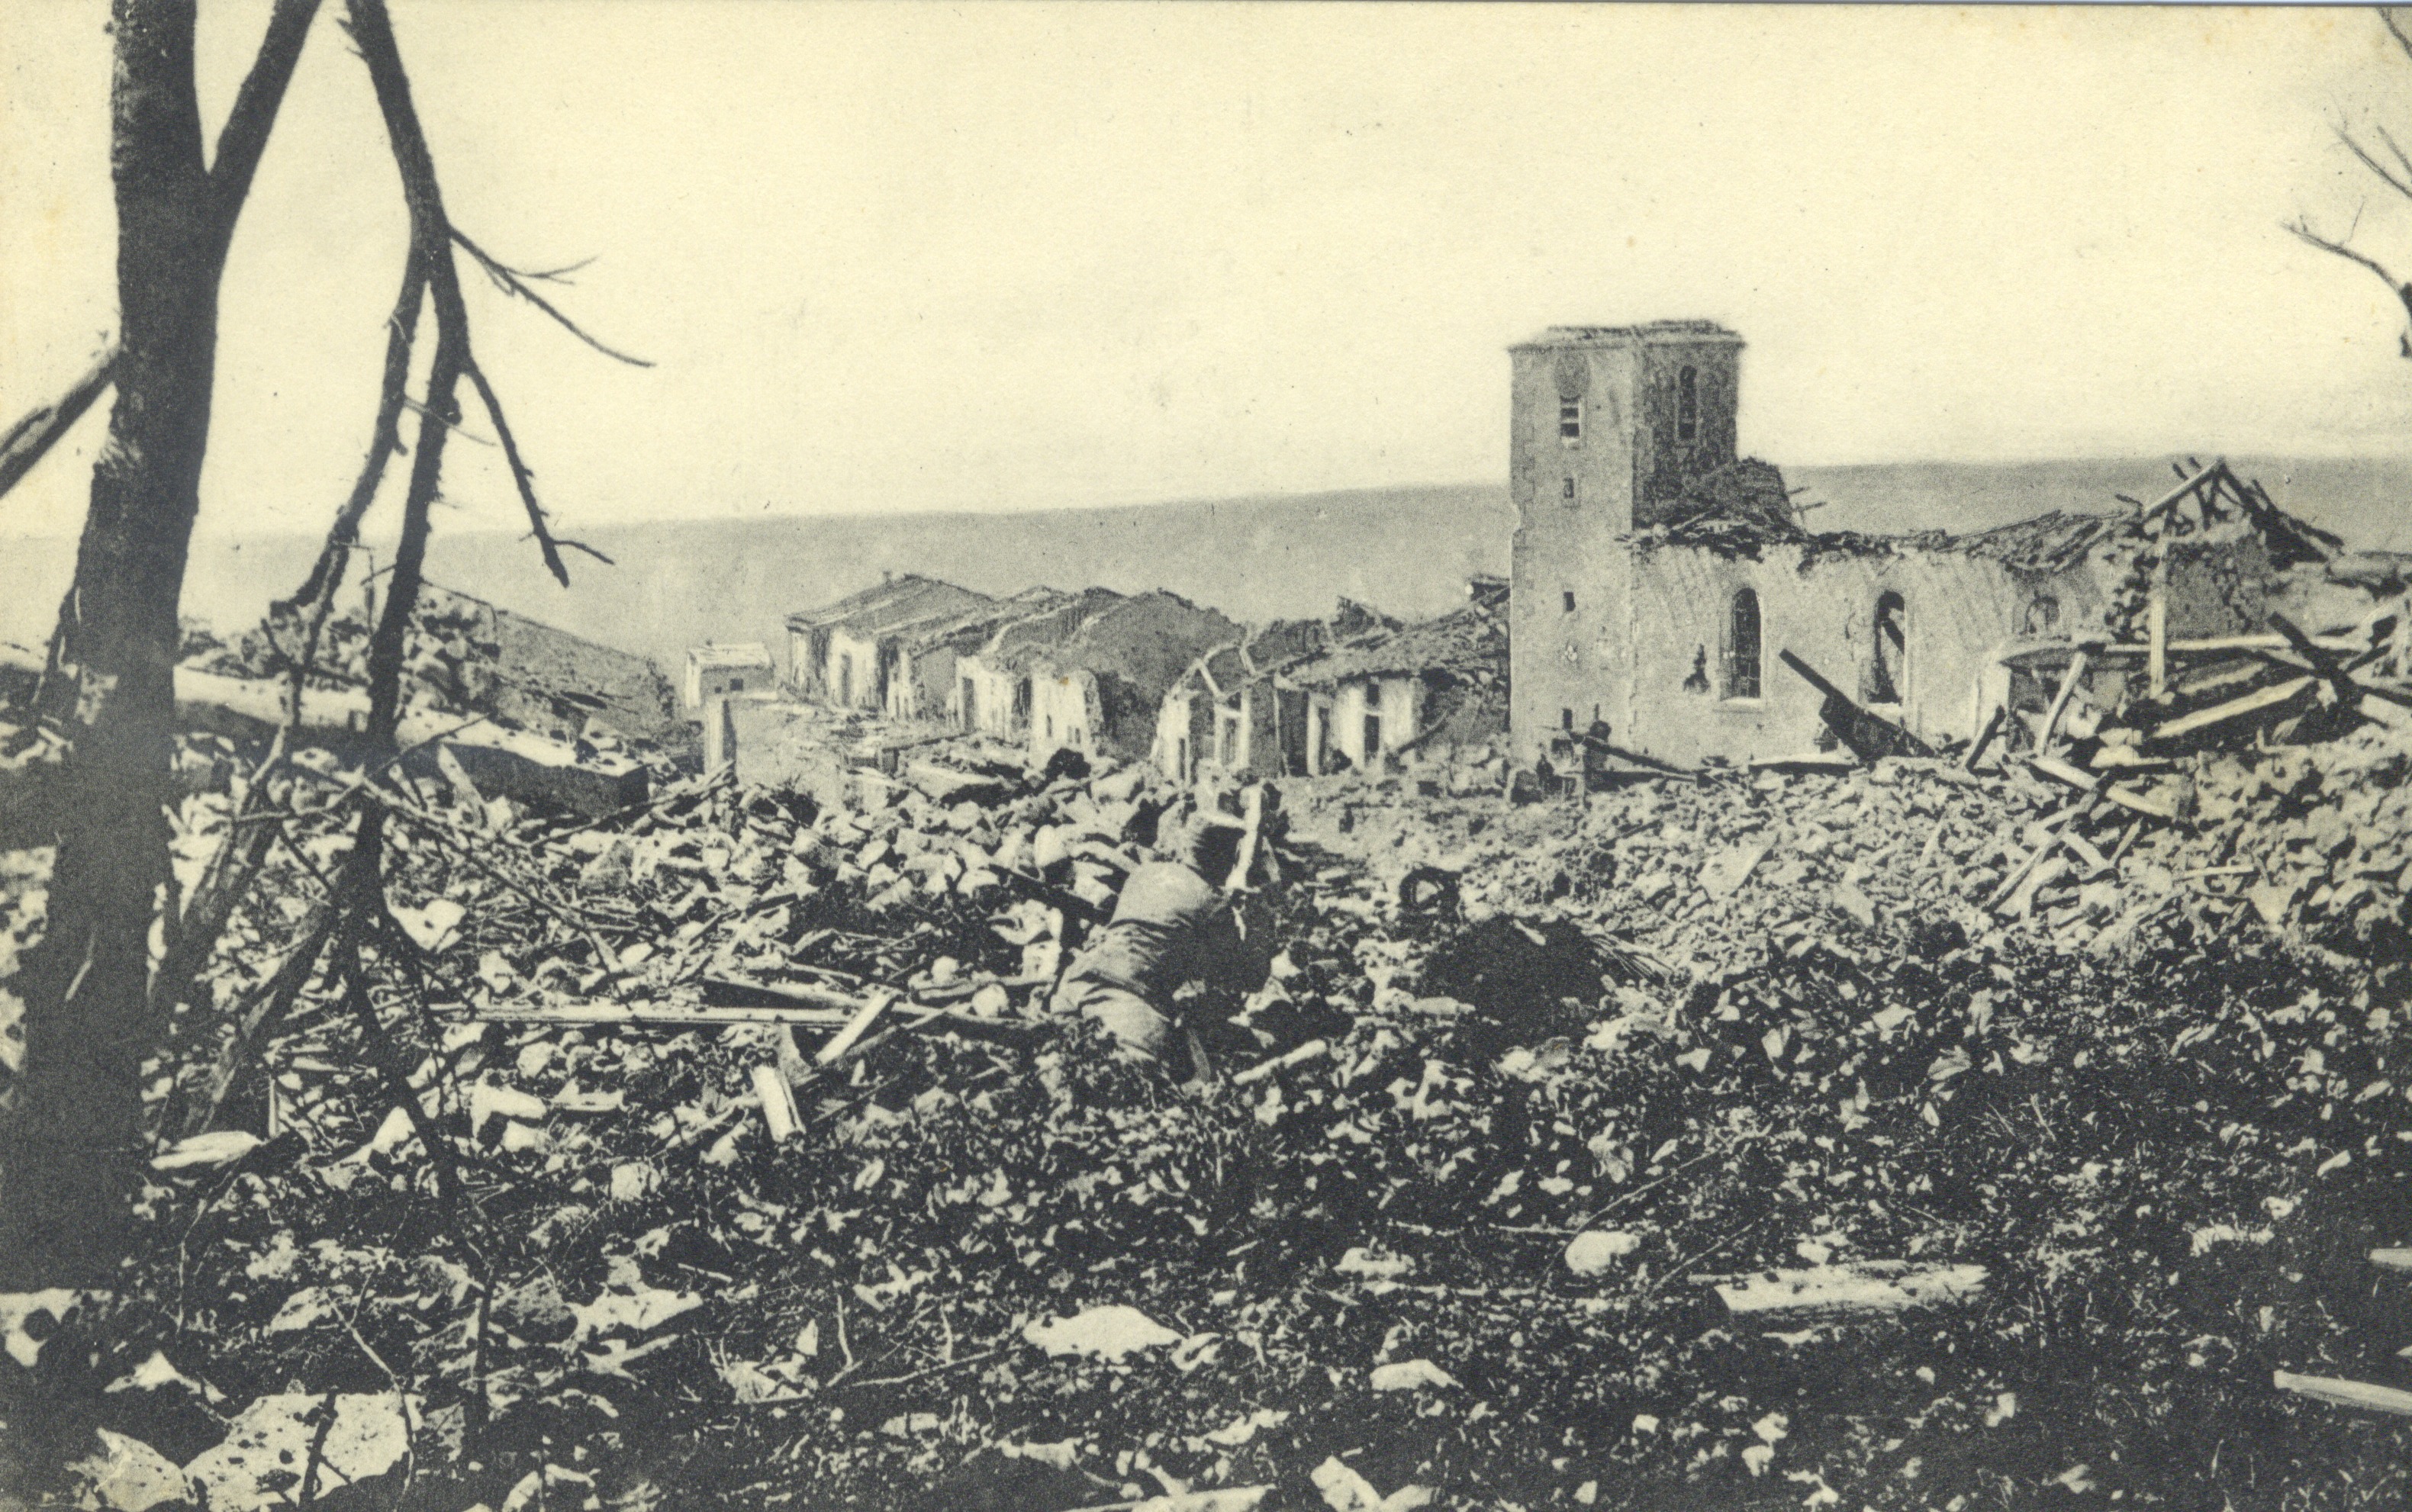 A vintage photograph capturing the wreckage of a village during World War I.